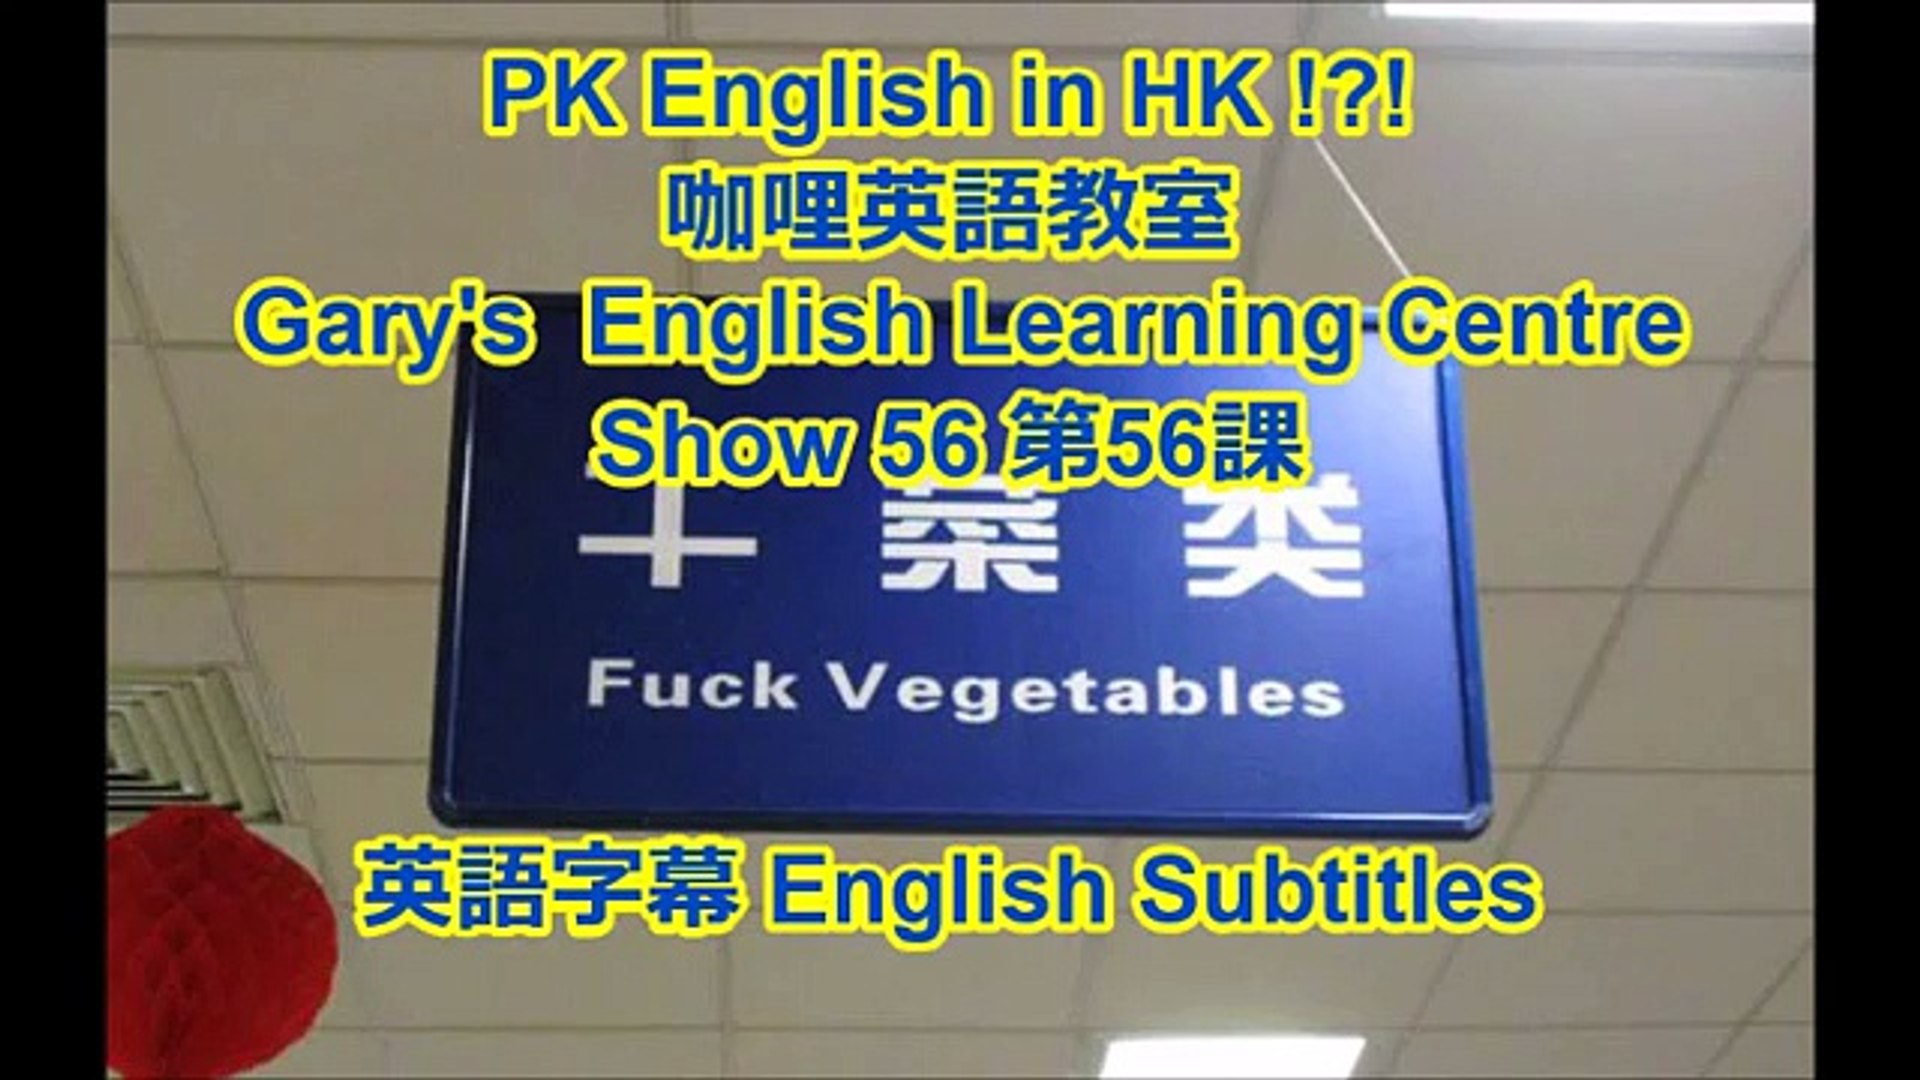 ⁣PK English in HK ?!? Gary's English Learning Centre Show 56